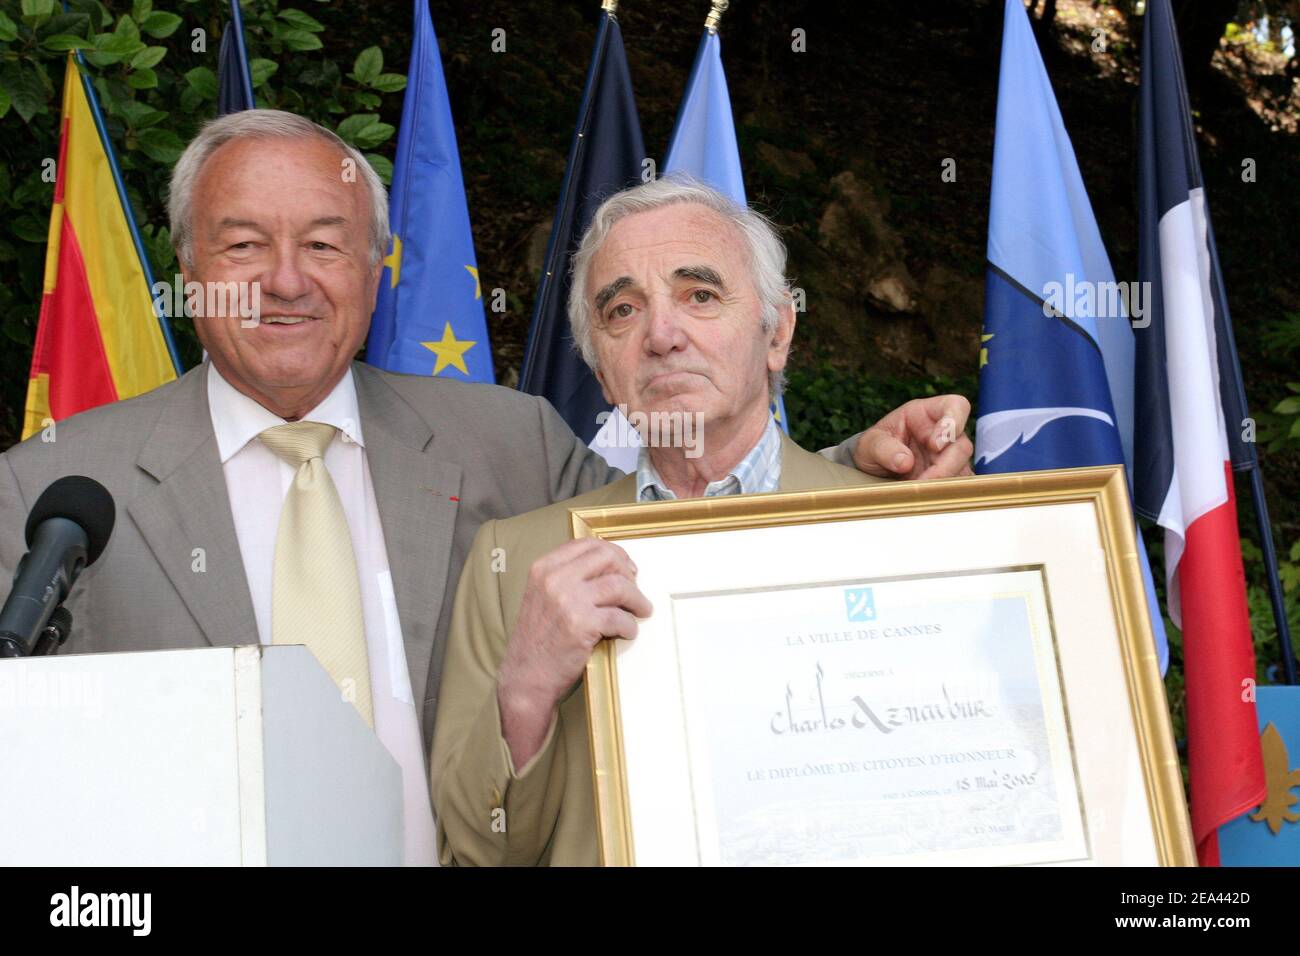 French singer Charles Aznavour (r) receives from Cannes' mayor Bernard Brochand, the medal of Citizen of Honor and the palm of the city during a ceremony held at the Villa Domergue in Cannes, France on May 18, 2005. Photo by Benoit Pinguet/ABACA Stock Photo